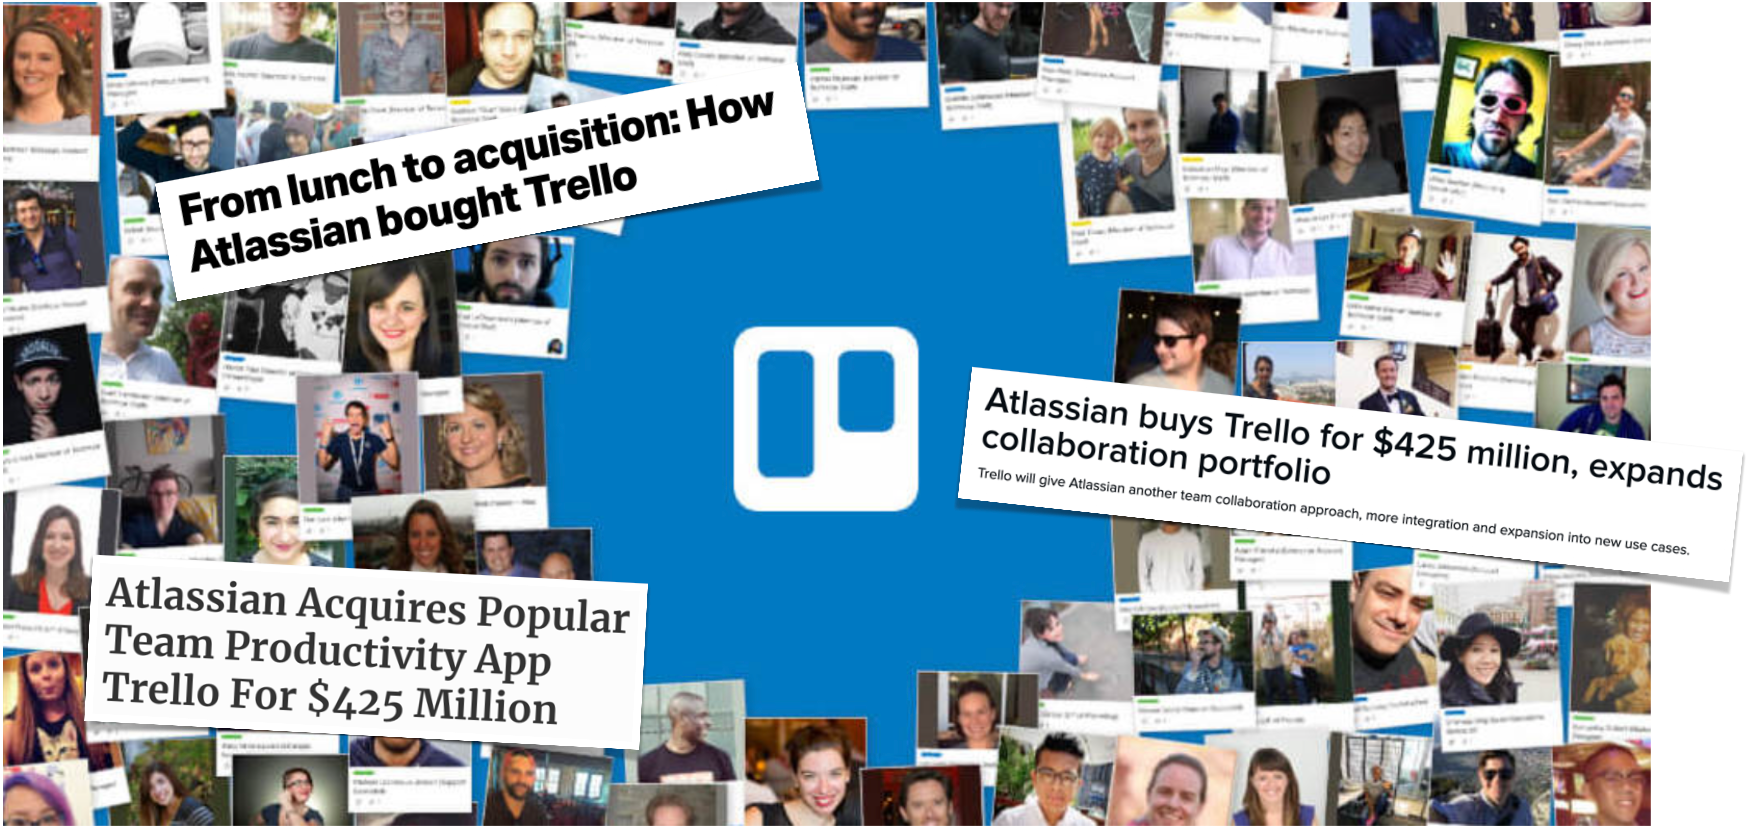 Collage of headlines related to Atlassian's acquisition of Trello